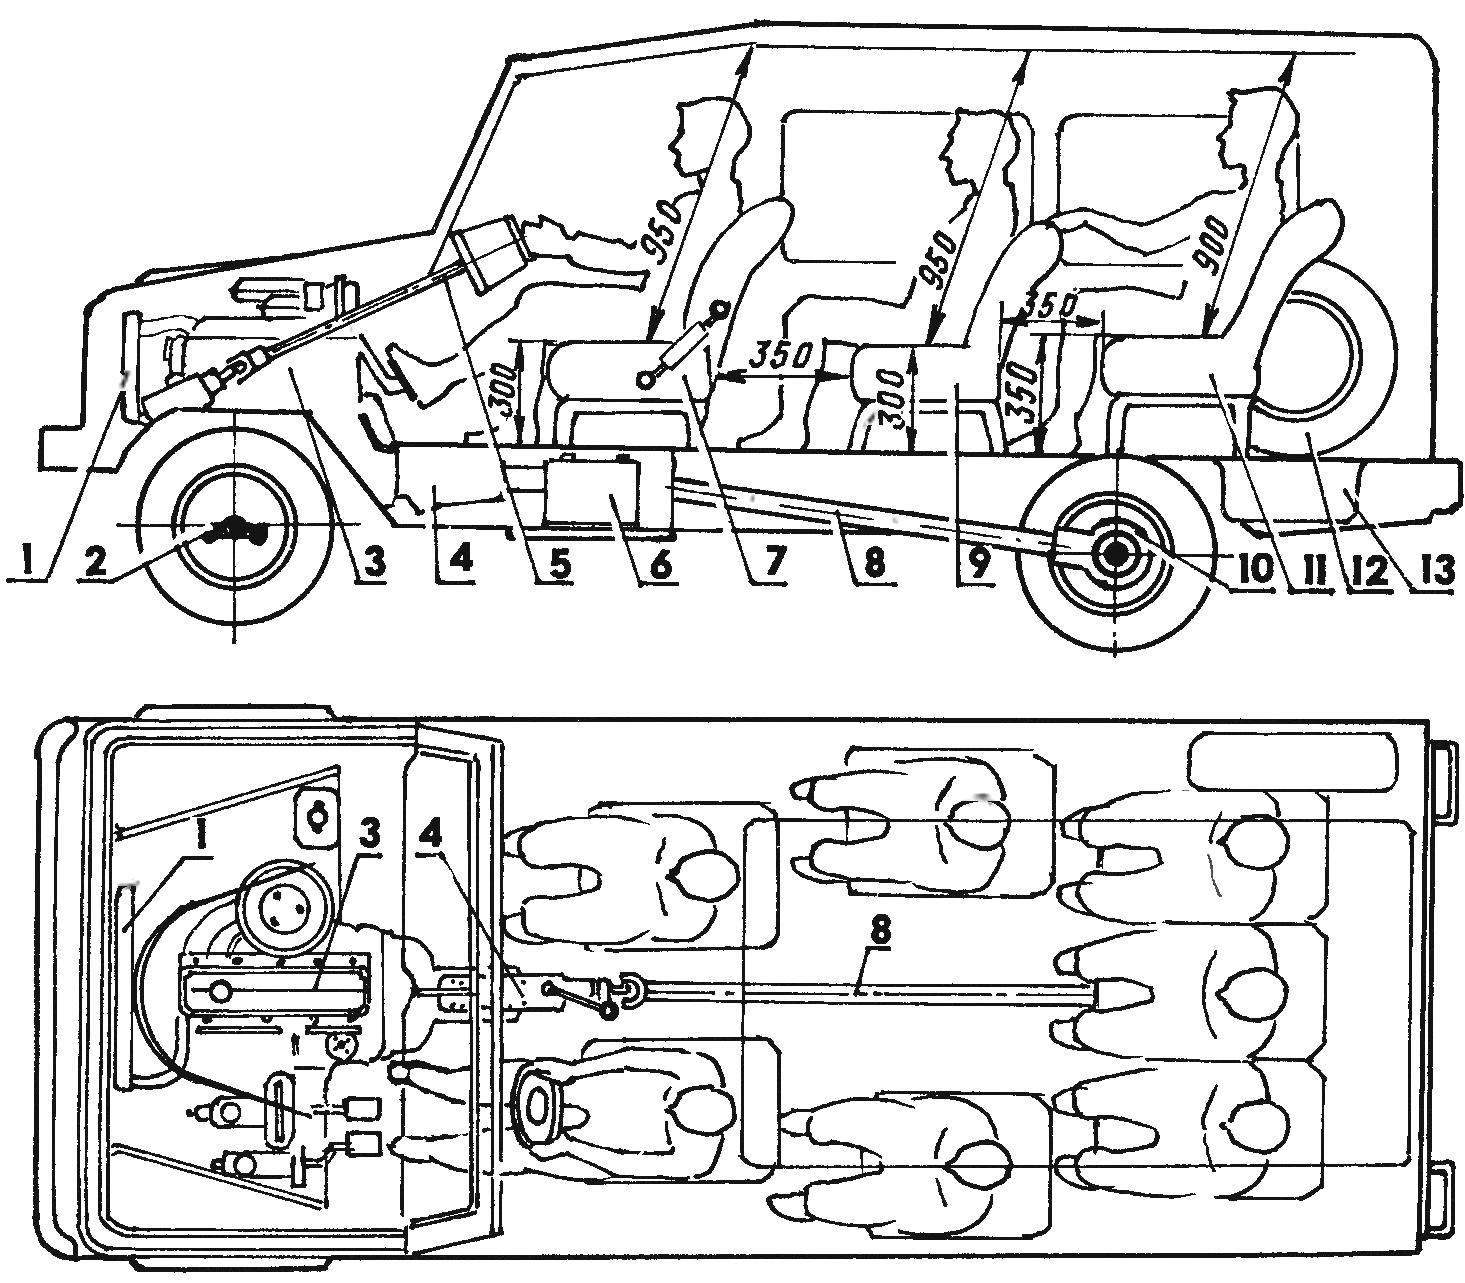 The layout of the car and the location of the seats in the cabin